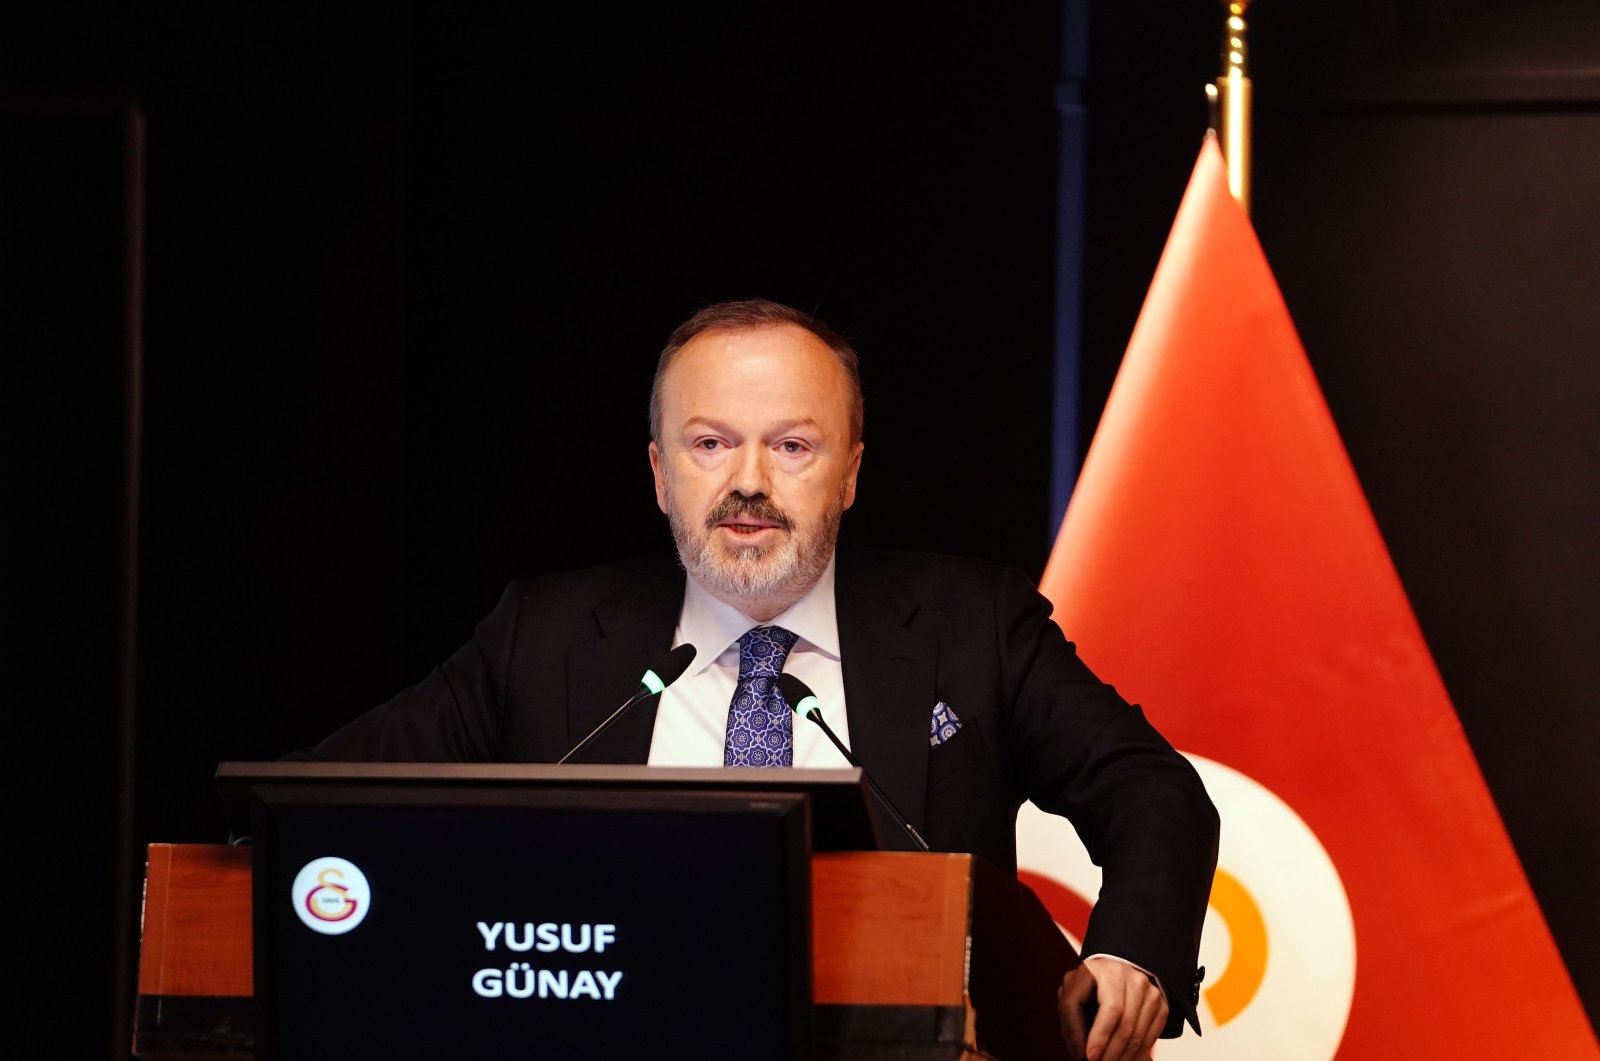 Galatasaray Deputy Chairman Yusuf Günay gives a speech in this undated photo. (AA Photo)